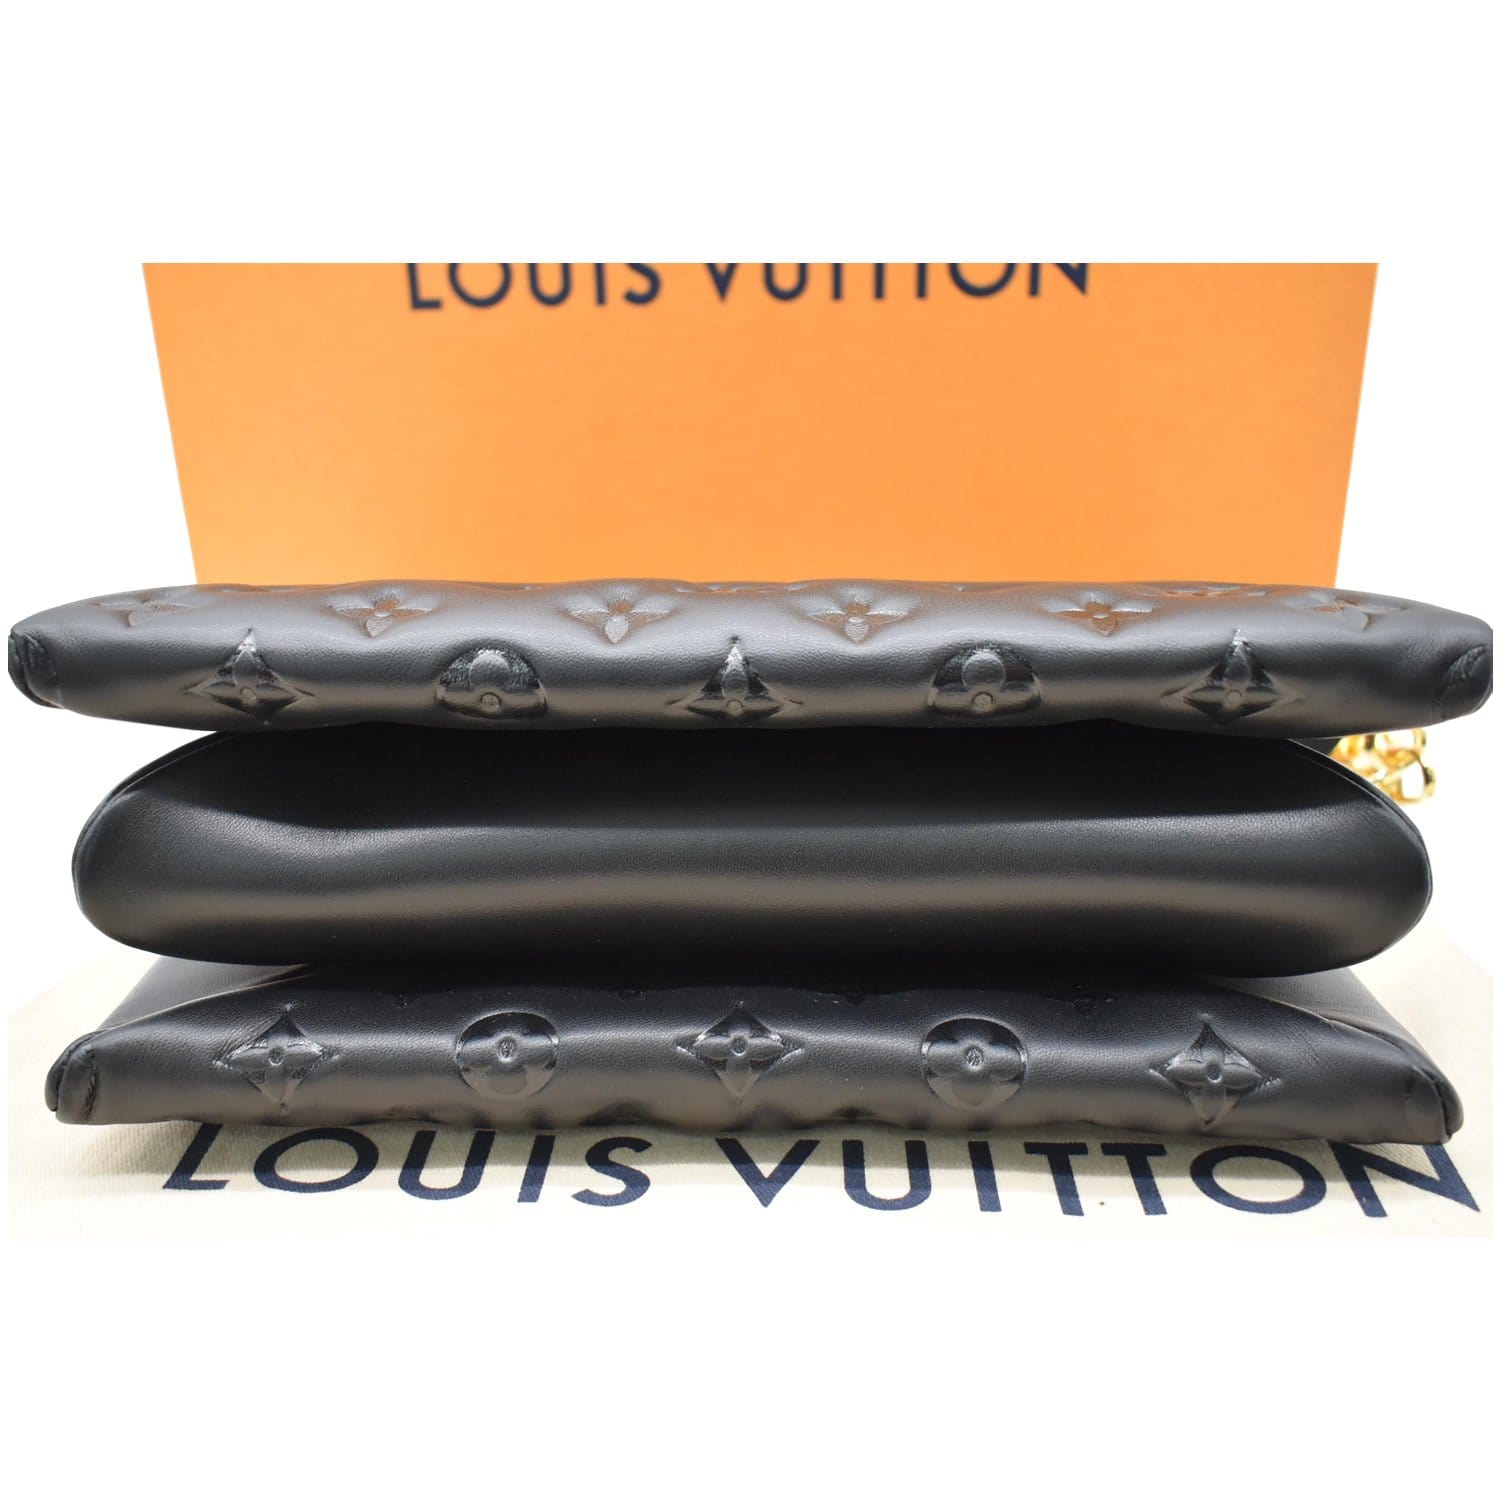 Coussin leather handbag Louis Vuitton Black in Leather - 25275479